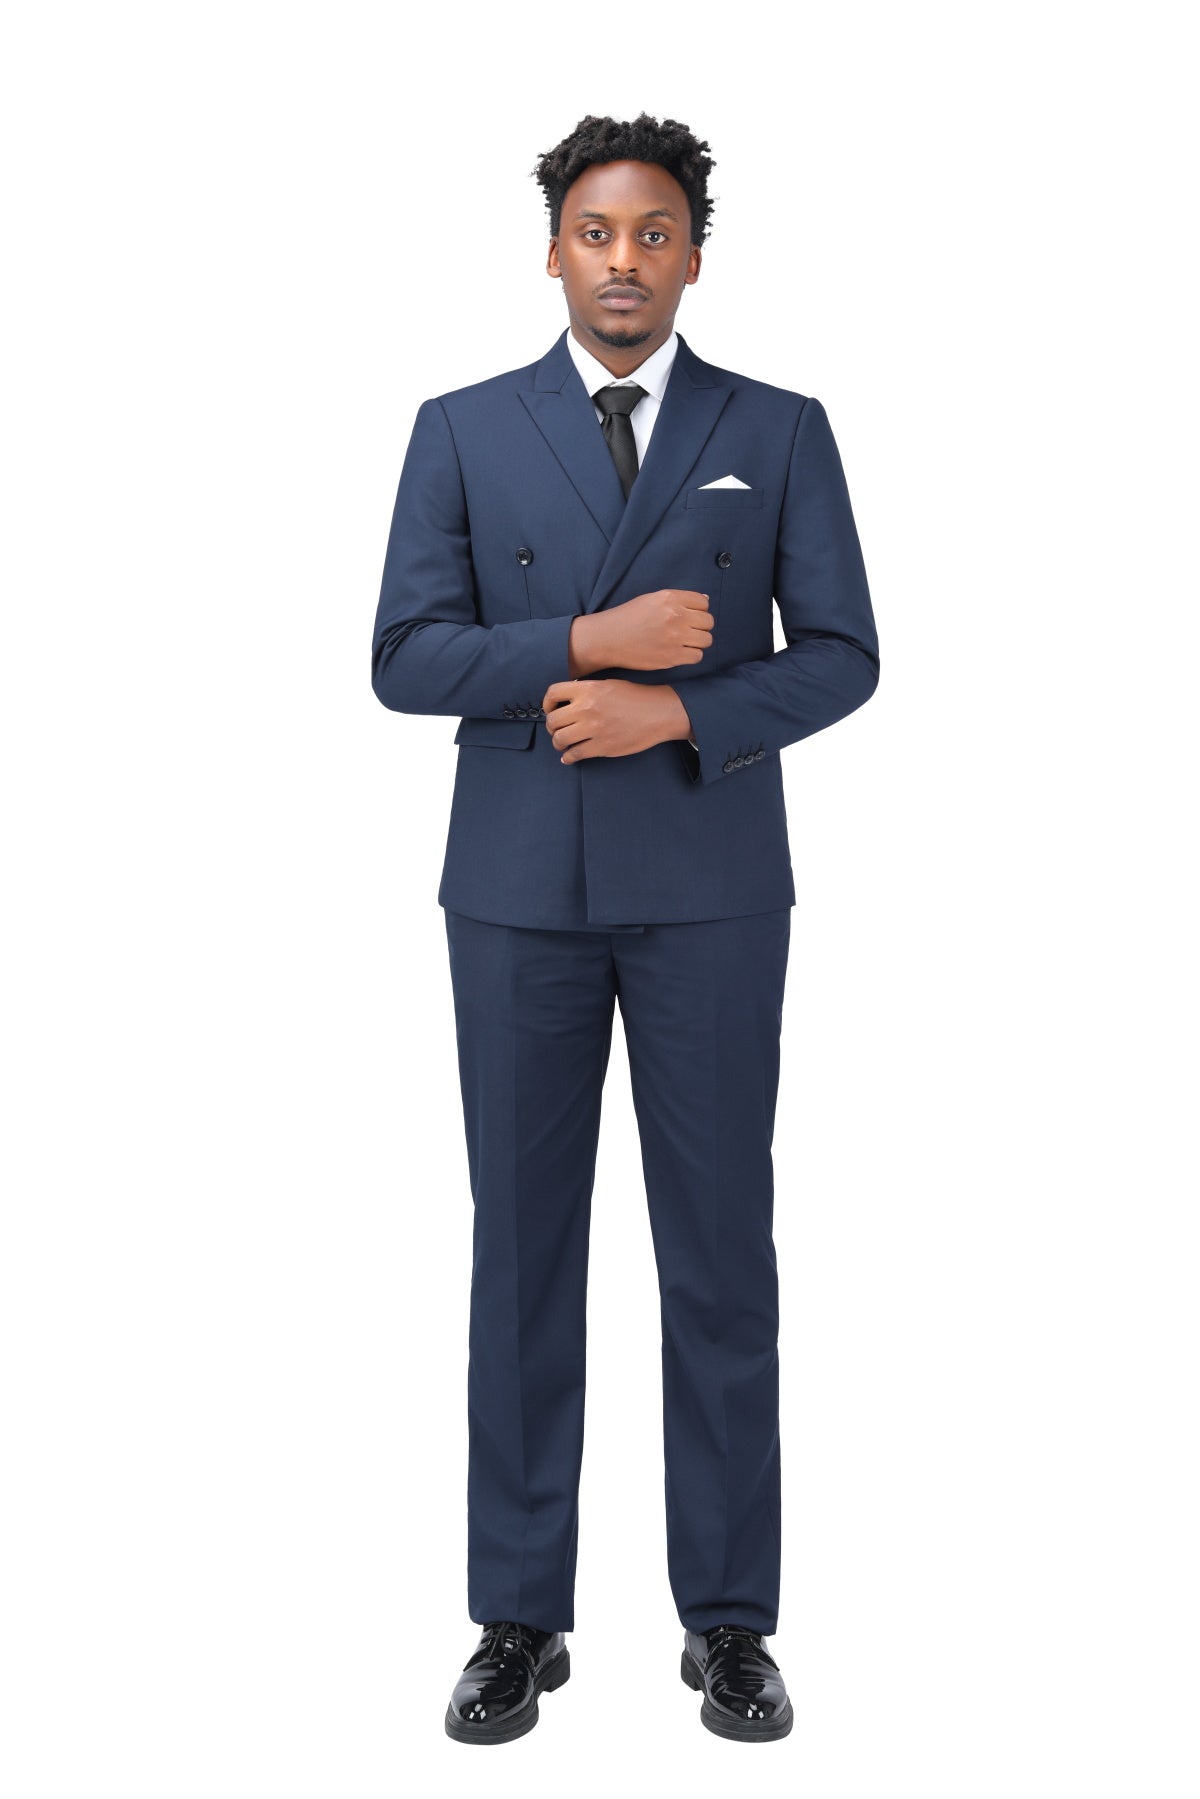 2-Piece Double Breasted Solid Color Navy Suit